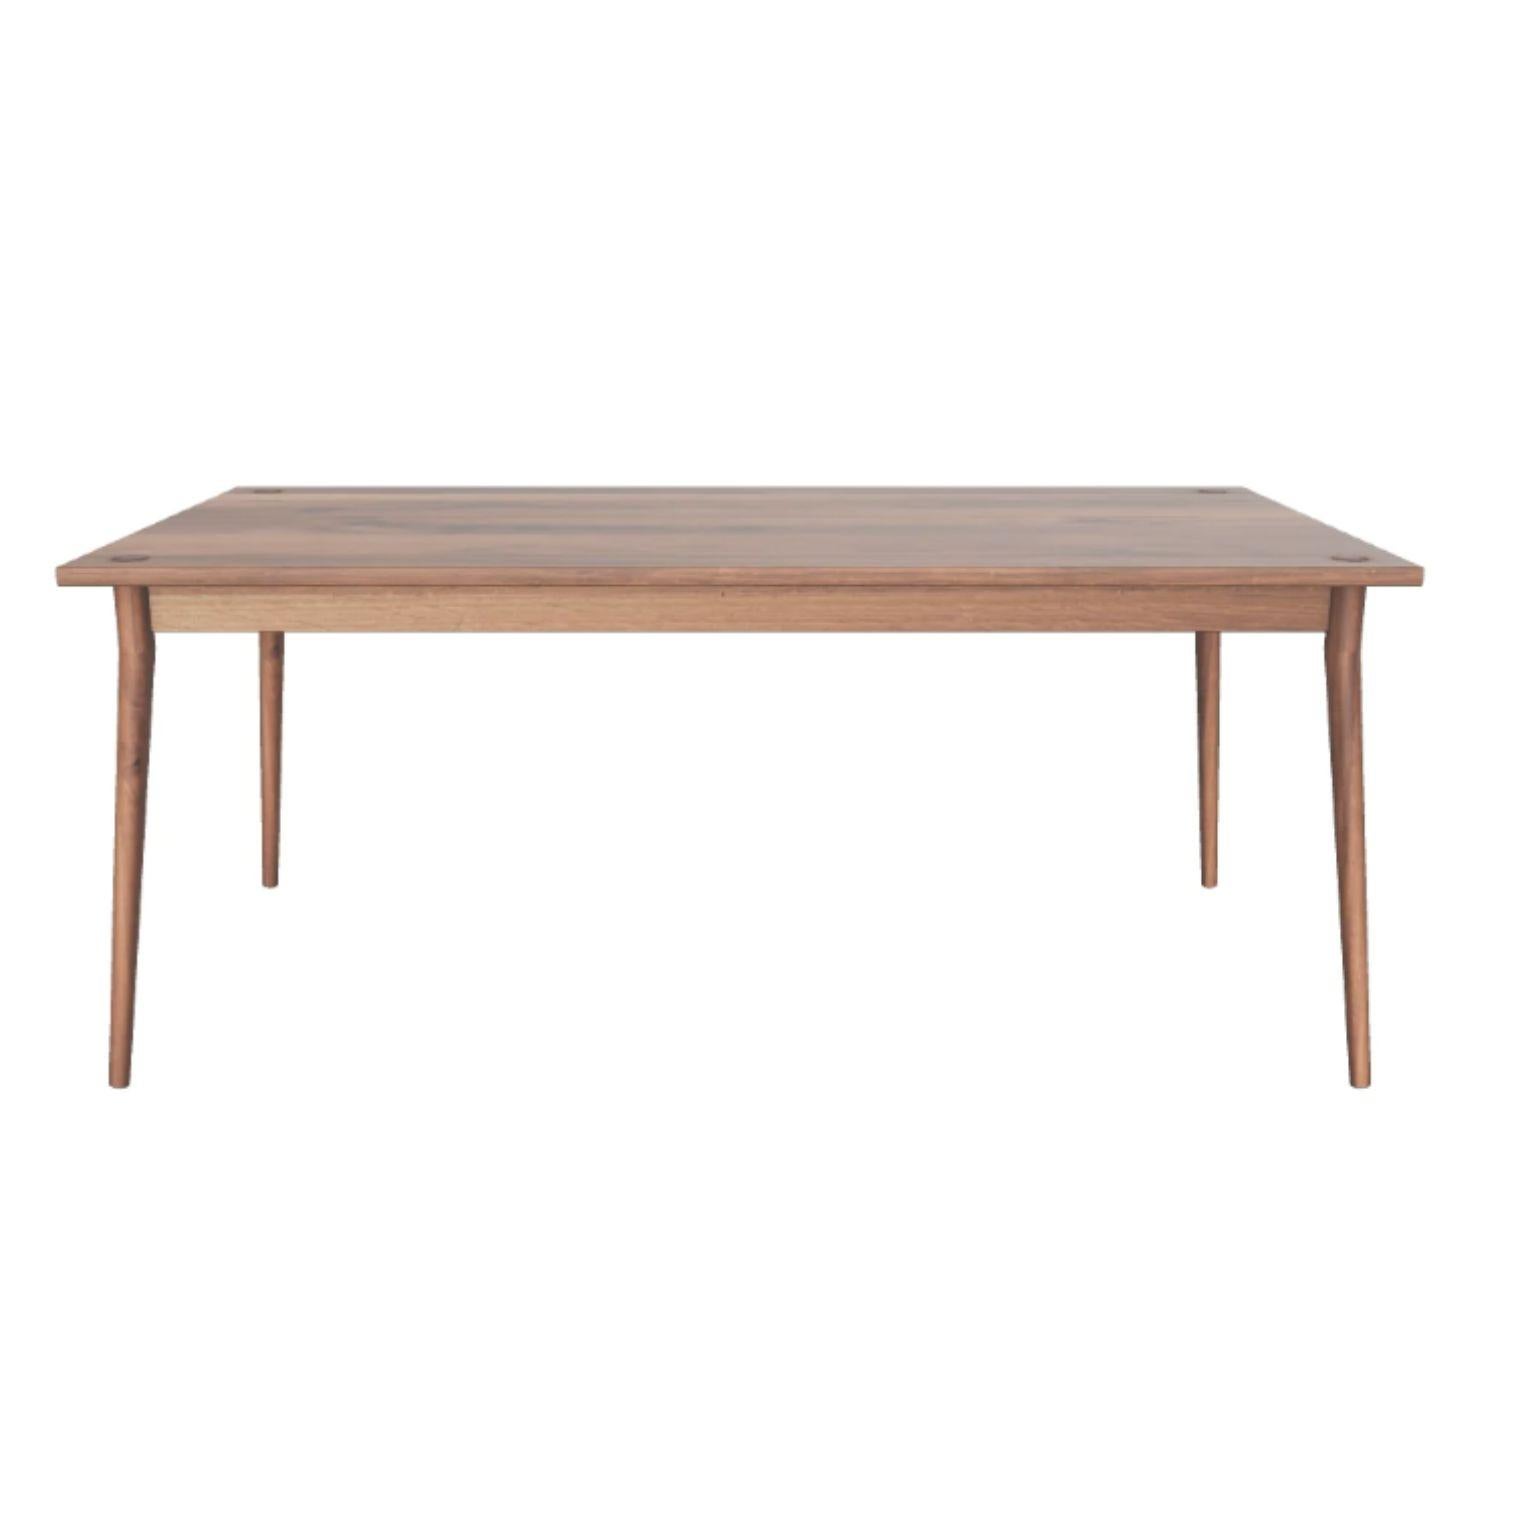 Walnut dining table by Fernweh Woodworking
Dimensions: W 91.5 x L 182.9 x H 76.2 cm.
Materials: Walnut.
Different wood options: walnut, charcoal ash, white ash; and different dimensions available.

A beautiful minimalist option for your kitchen